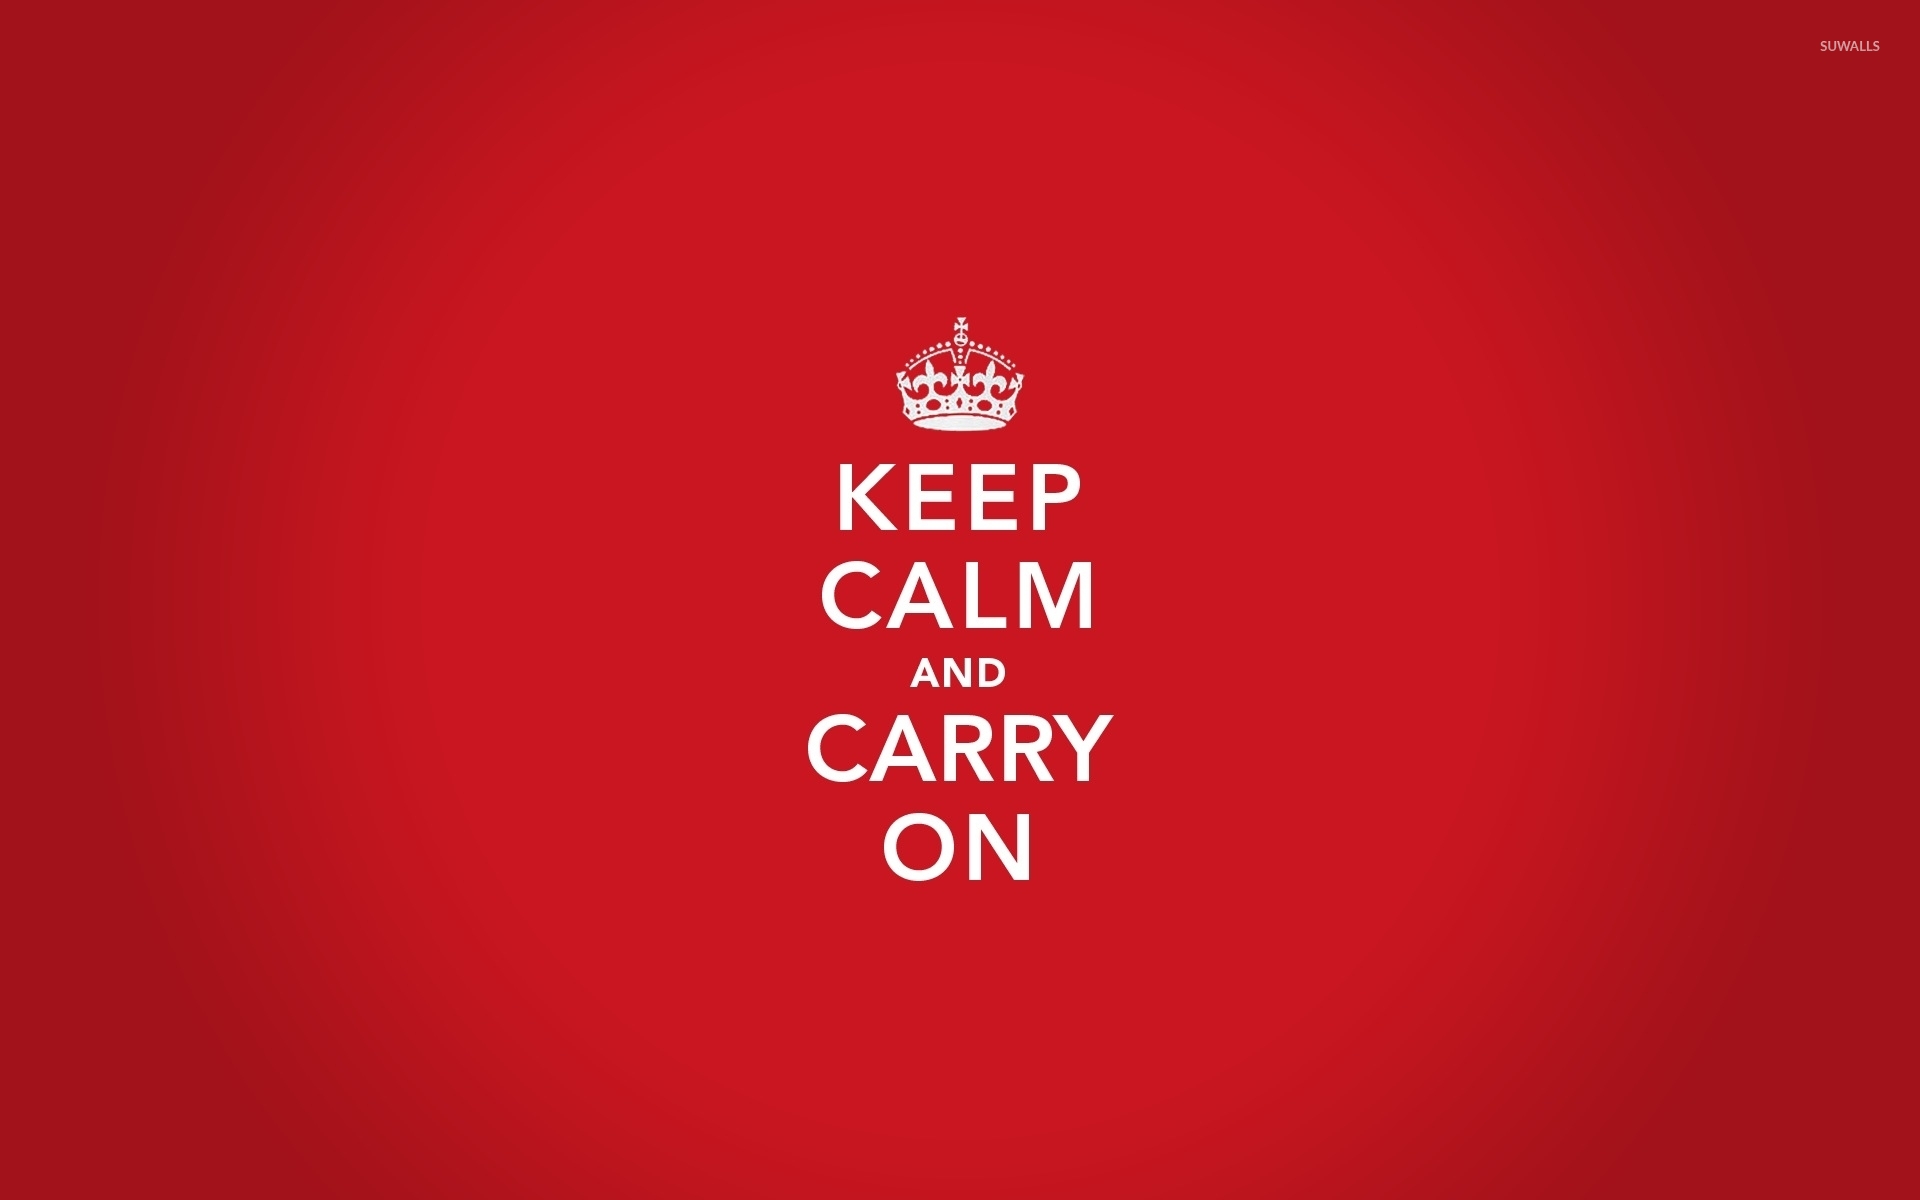 Keep calm and carry on wallpaper